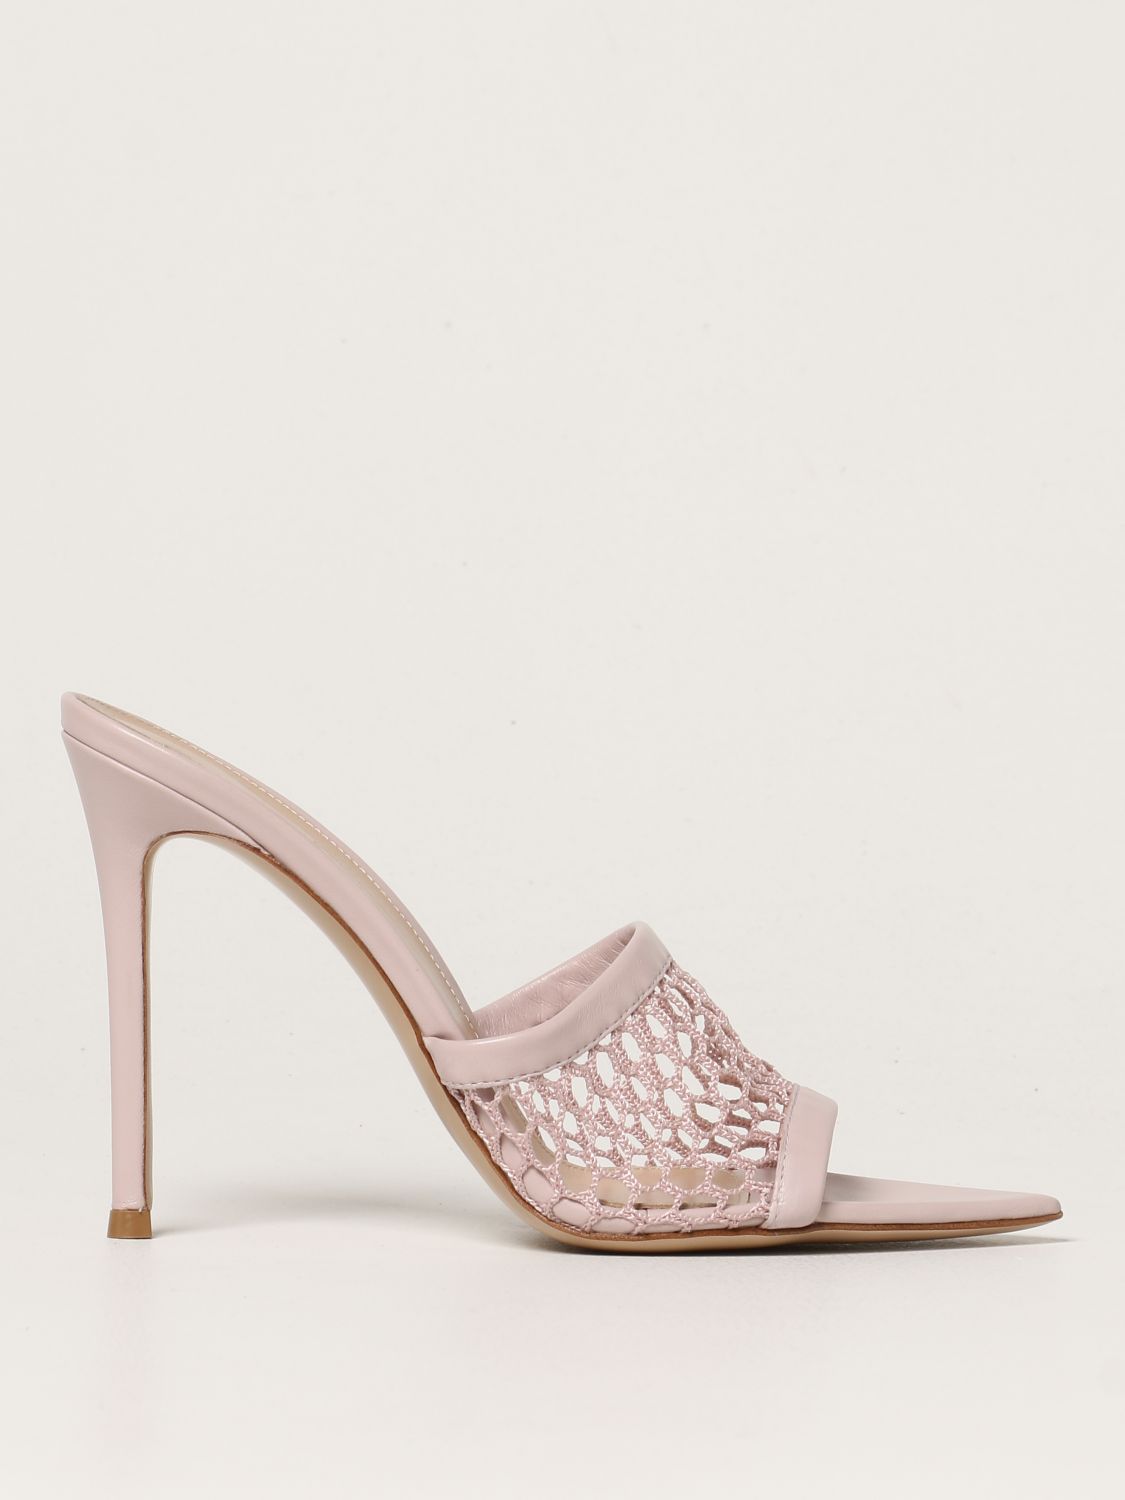 Sandales à talons Gianvito Rossi: Chaussures à talons femme Gianvito Rossi rose 1